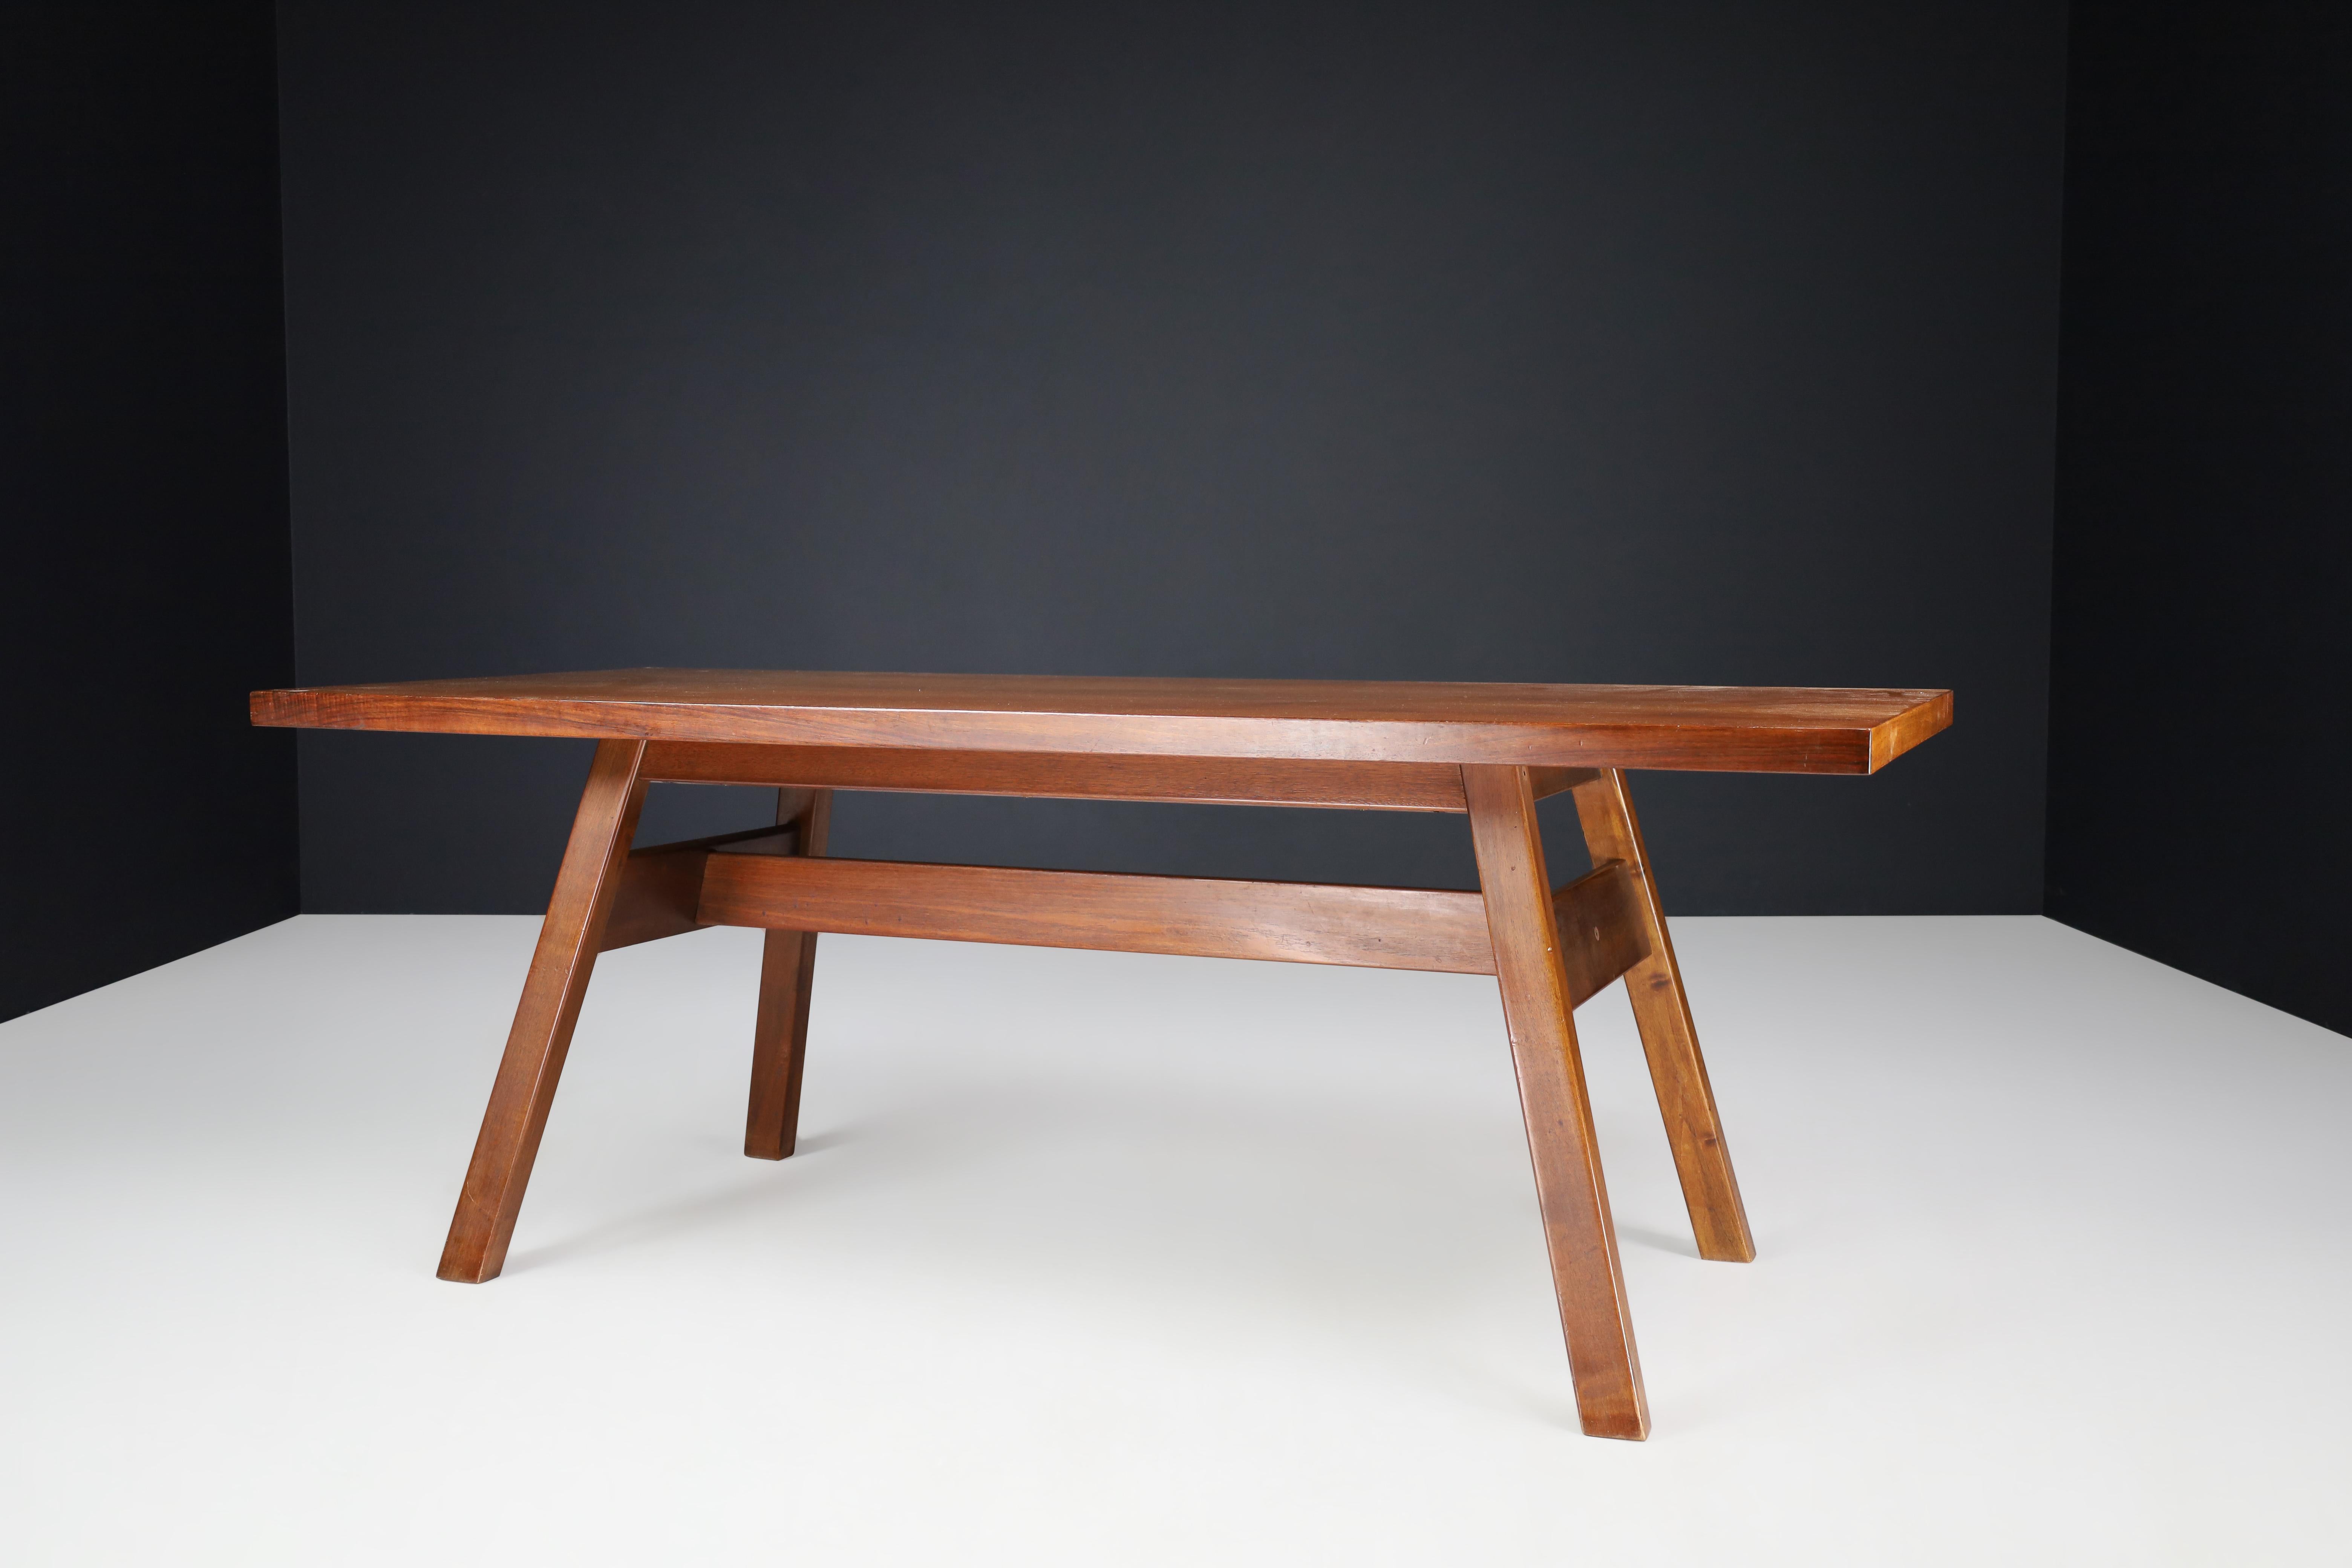 Giovanni Michelucci Walnut Dining Room Table for Poltronova, Italy, 1964

This beautiful Torbecchia Walnut dining room table was designed in 1964 by Giovanni Michelucci for Poltronova in Italy. The table is part of the Torbecchia series and is